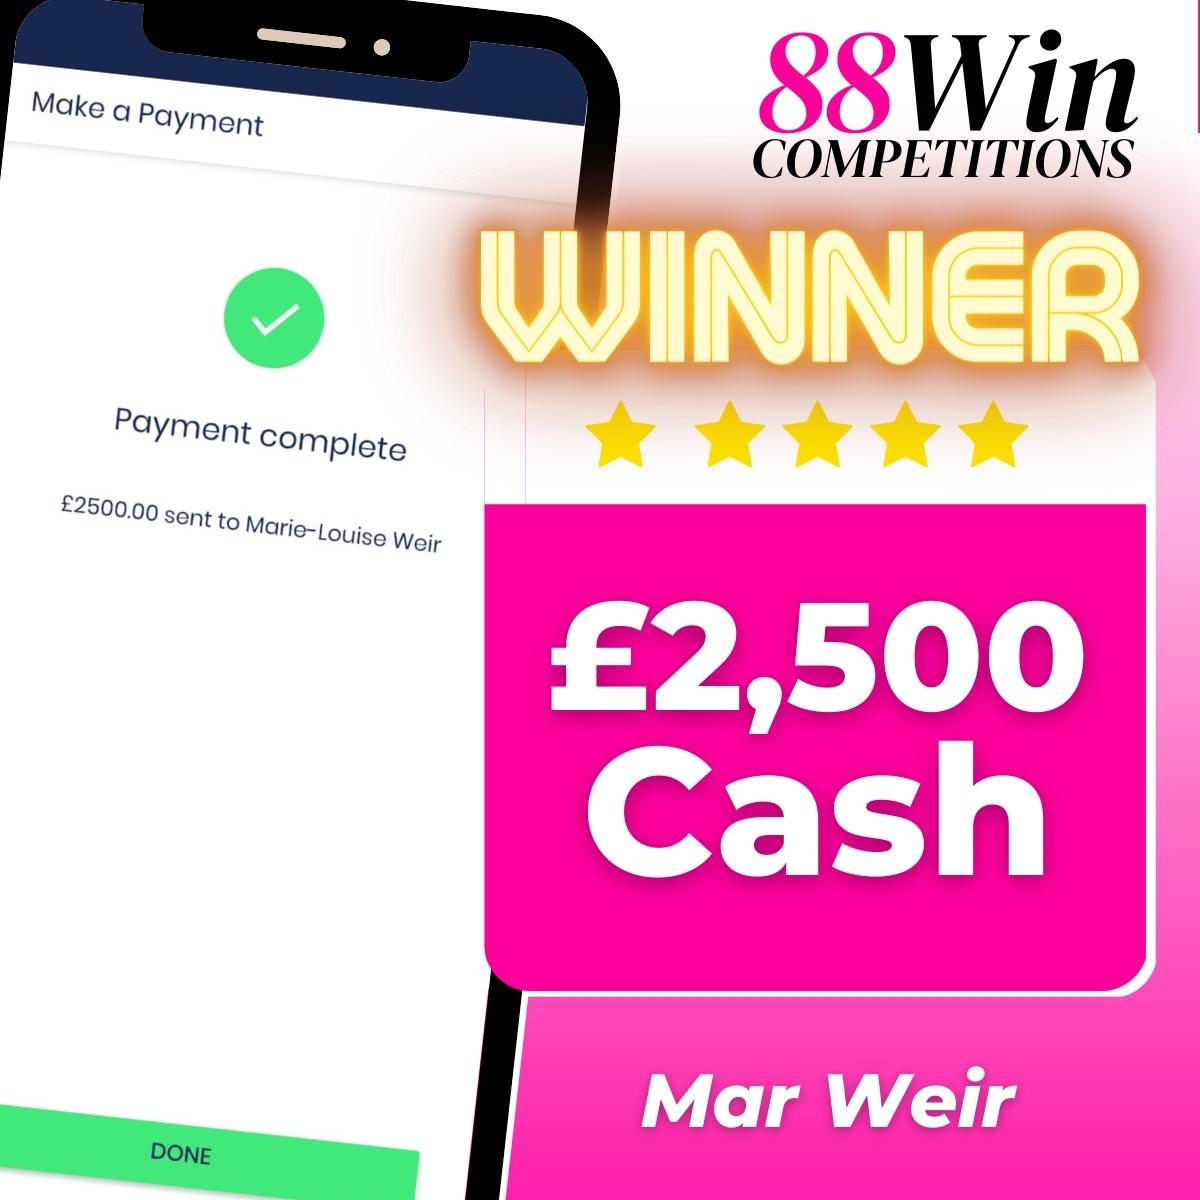 88Win Competitions £2,500 Winner Photo